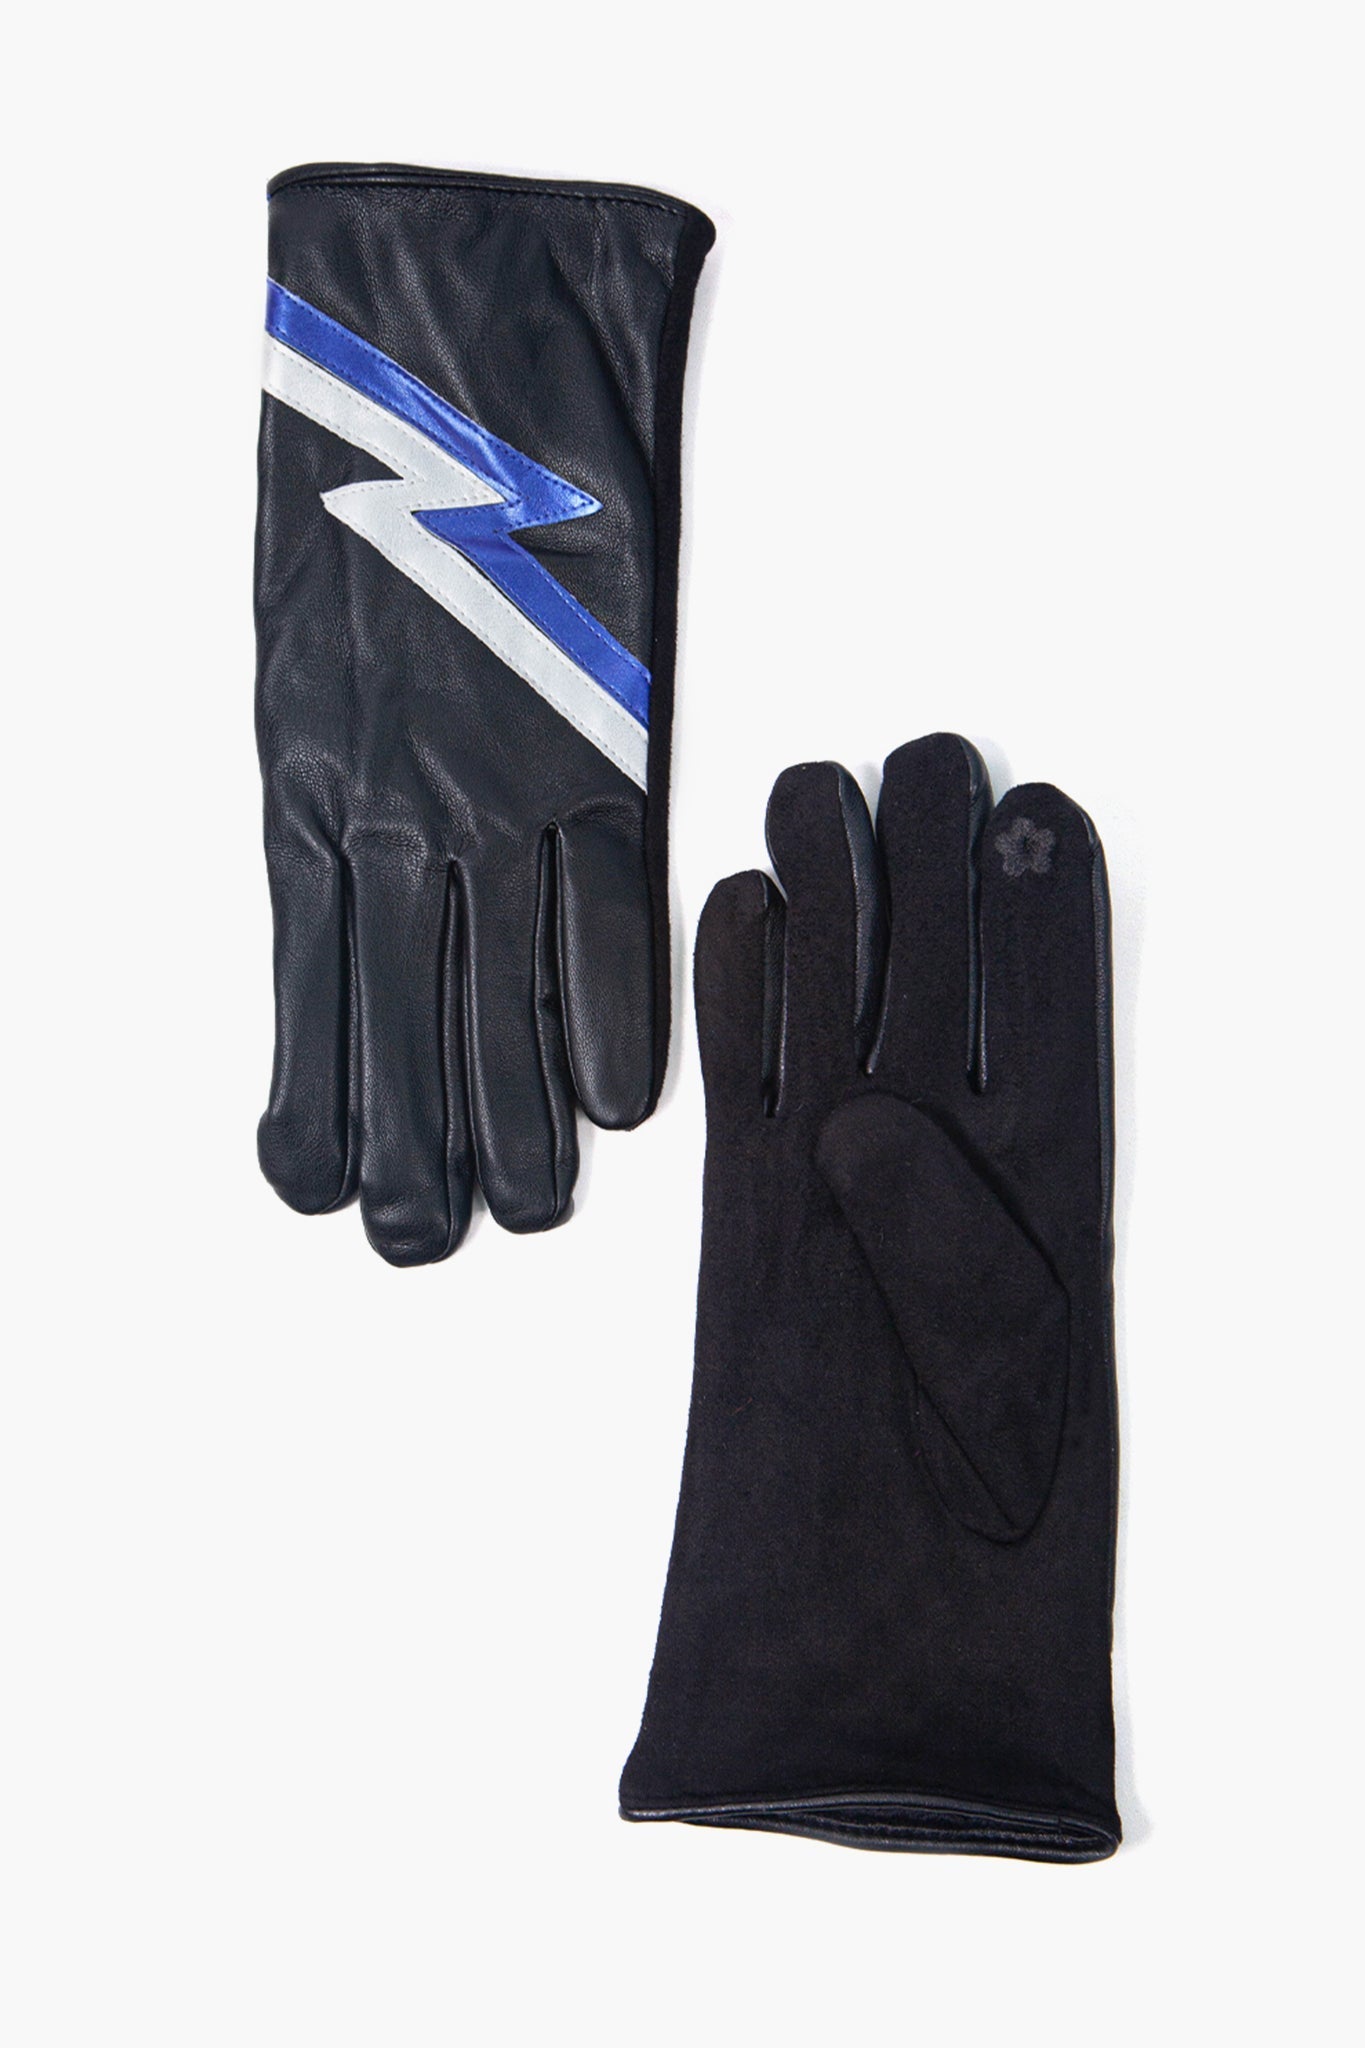 showing the plain palm and the metallic lightning bolt design on the back of the gloves